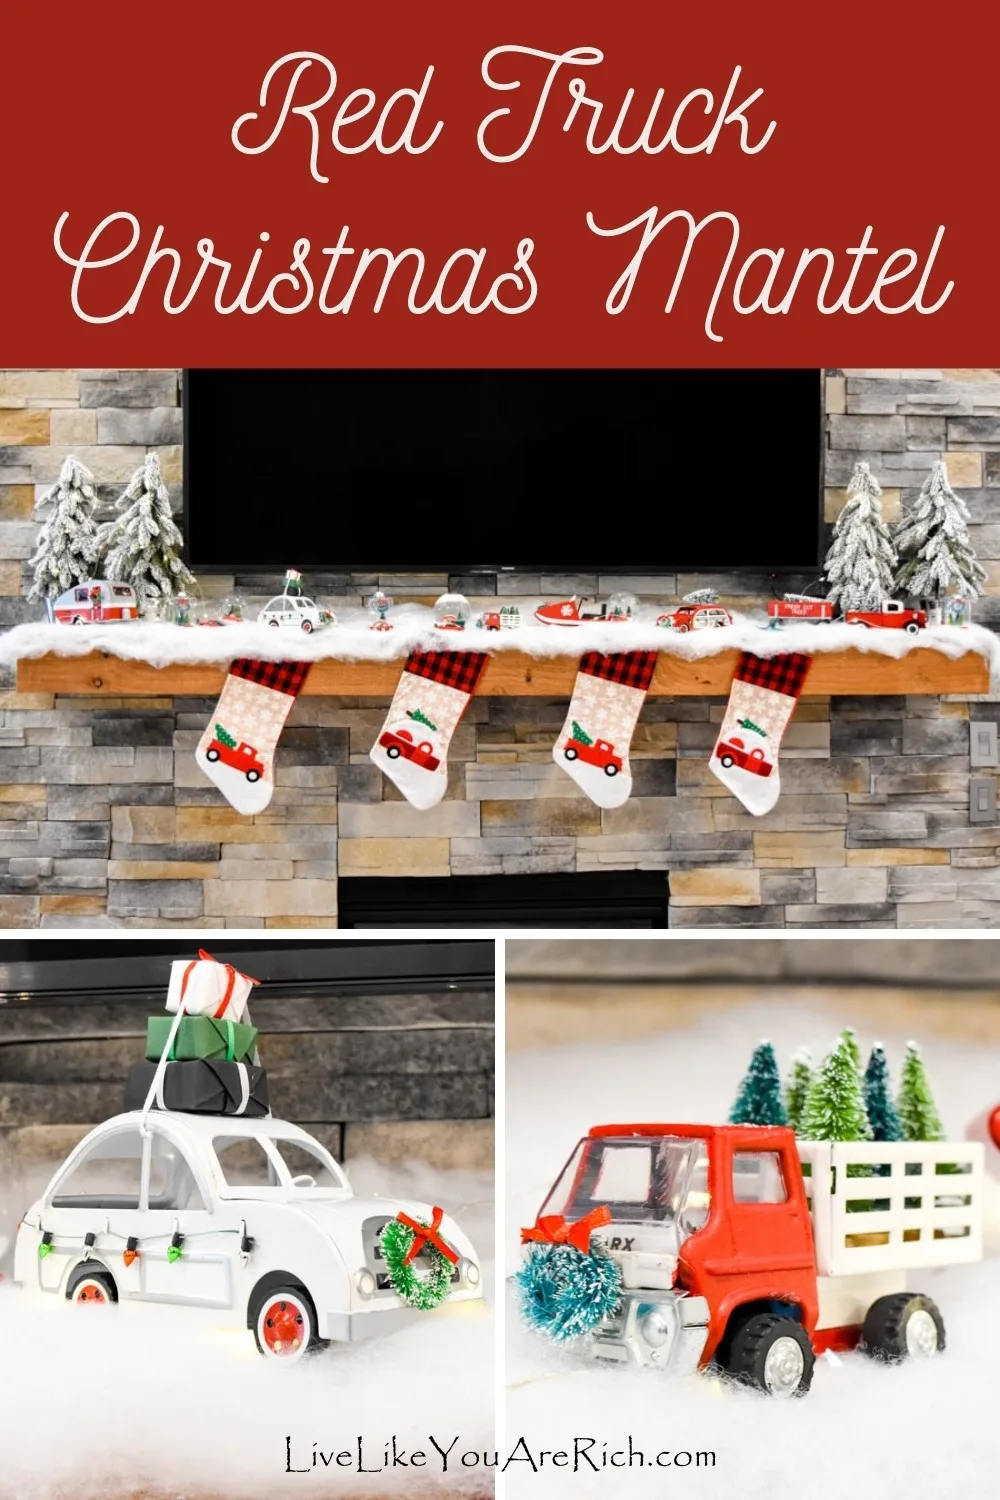 This year, 2020, I made a Red Truck Christmas Mantel scene above my fireplace. Over the past couple of years, the Red Truck Christmas tree decor started popping up here and there. Whenever I saw it, I thought it was so cute! I don’t always hop on the trendy-decor-bandwagon, but with this theme I totally did because I love it.